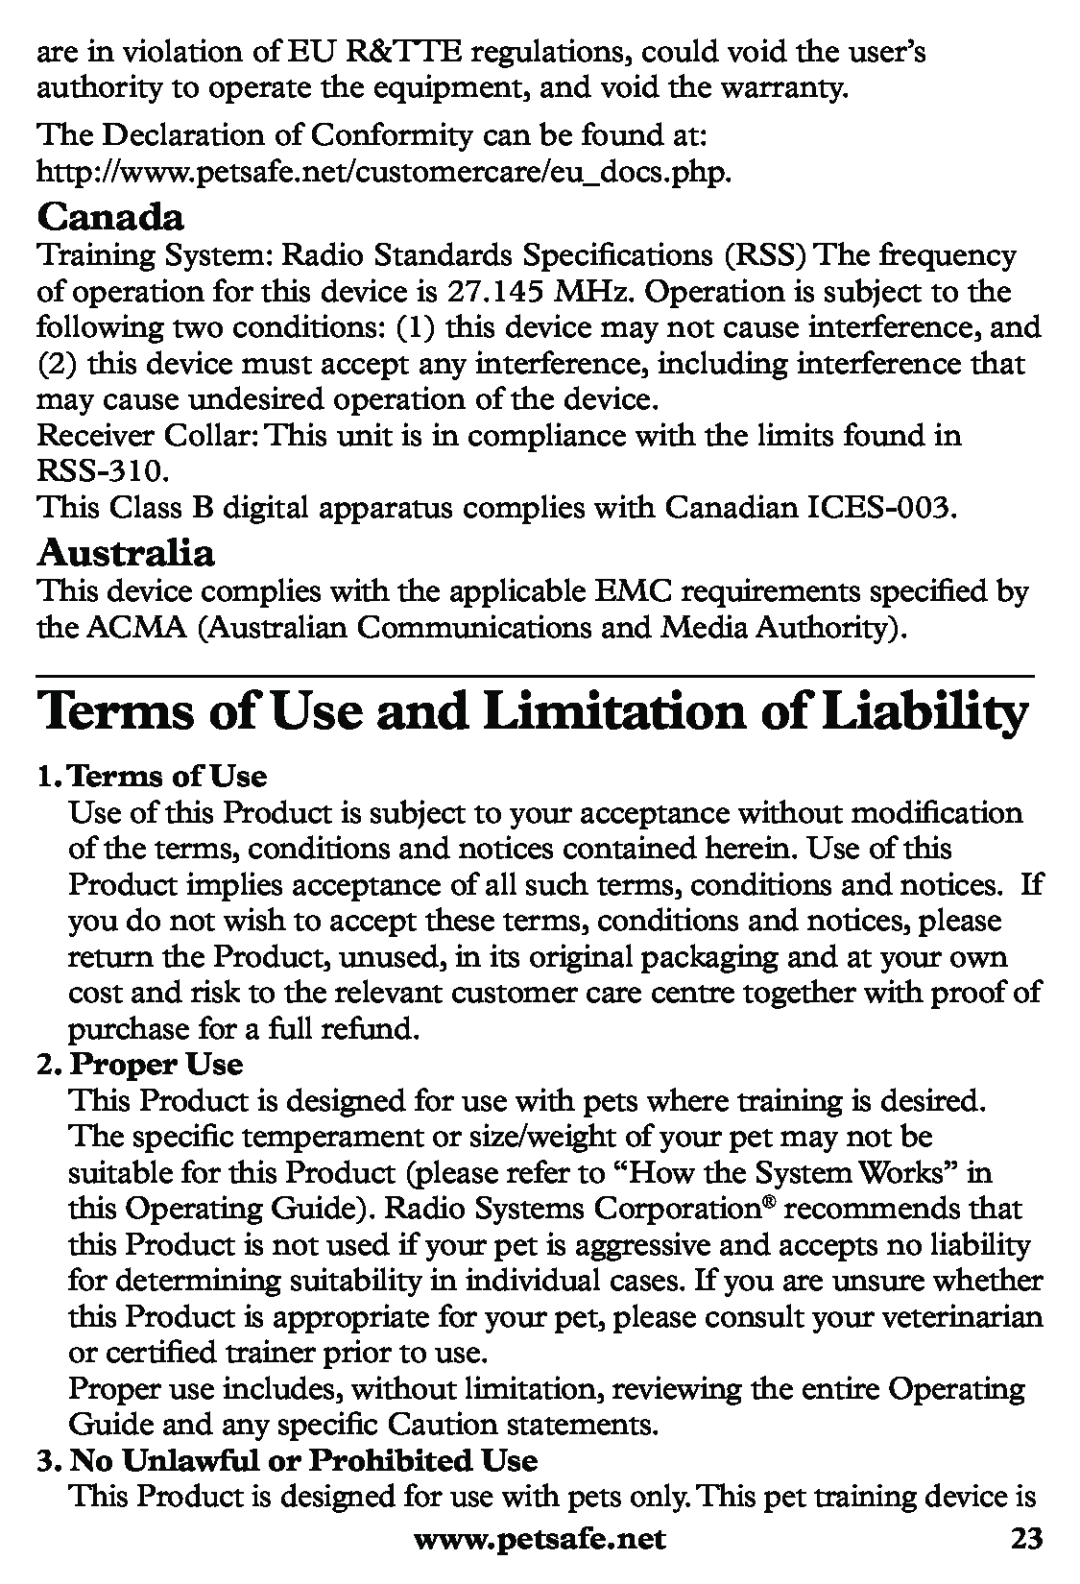 Petsafe PDT20-11939 Terms of Use and Limitation of Liability, Canada, Australia, Proper Use, No Unlawful or Prohibited Use 